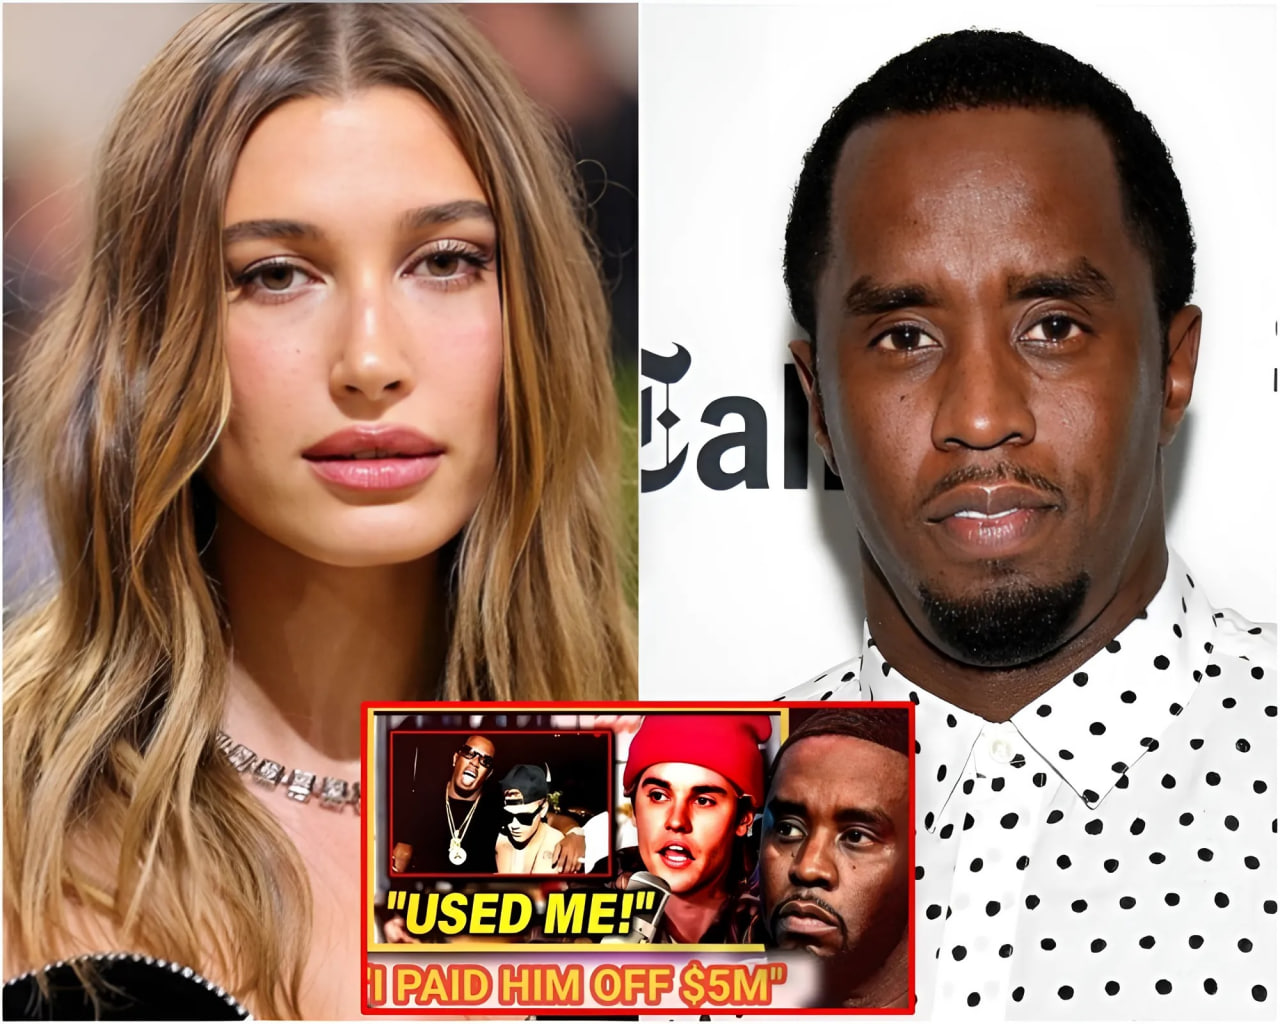 SHO:CK! JUSTIN BIEBER DRAGGED INTO DIDDY LEGAL AFTER HAILEY BIEBER REVEALED G@Y VIDEO